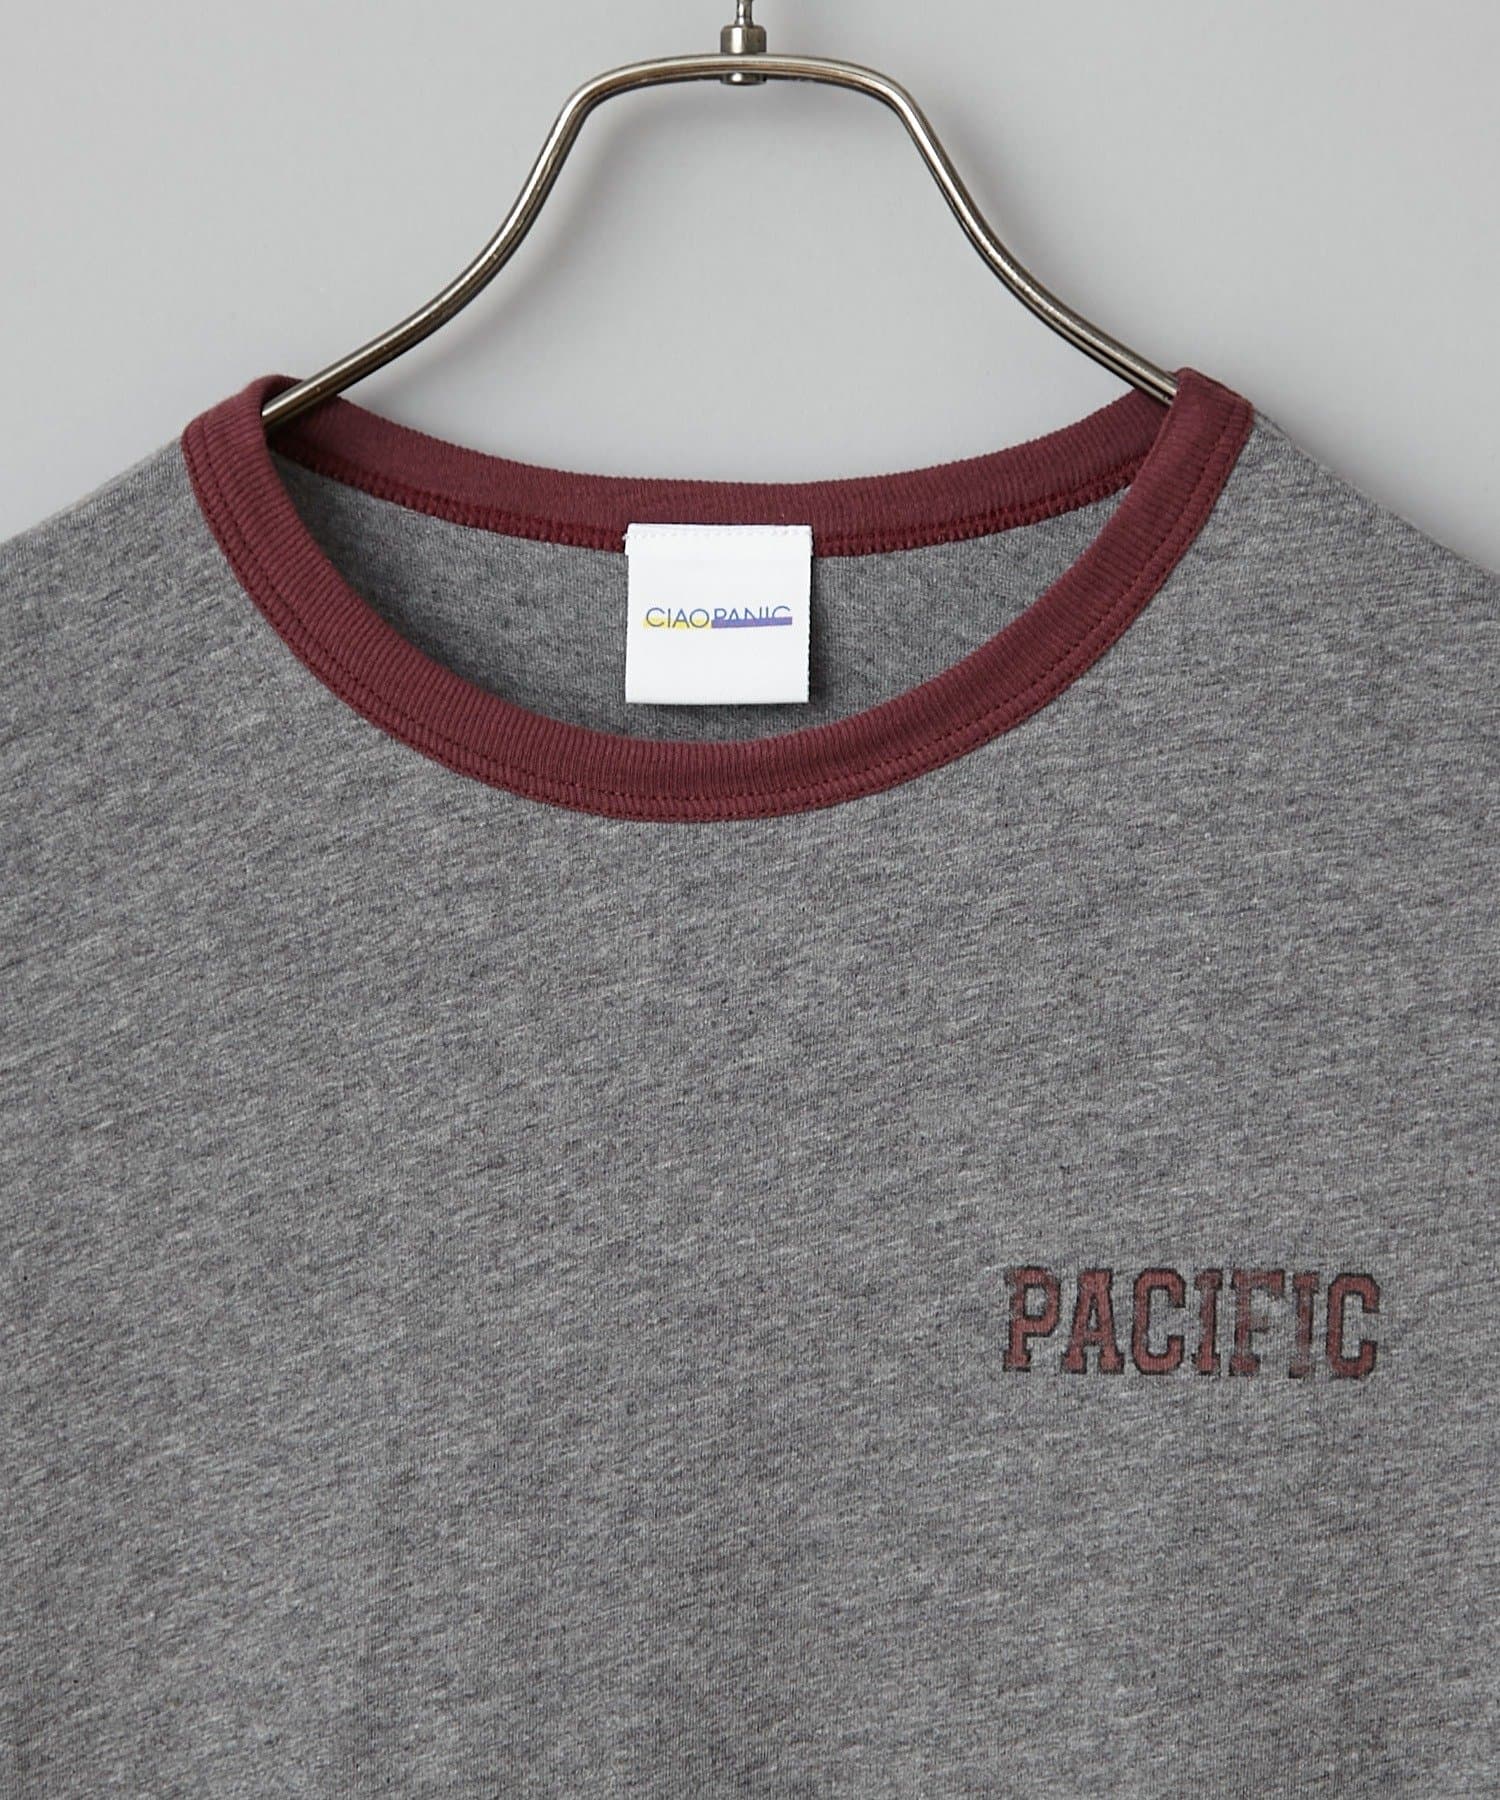 OUTLET(アウトレット) 【Ciaopanic】PACIFICリンガーTシャツ